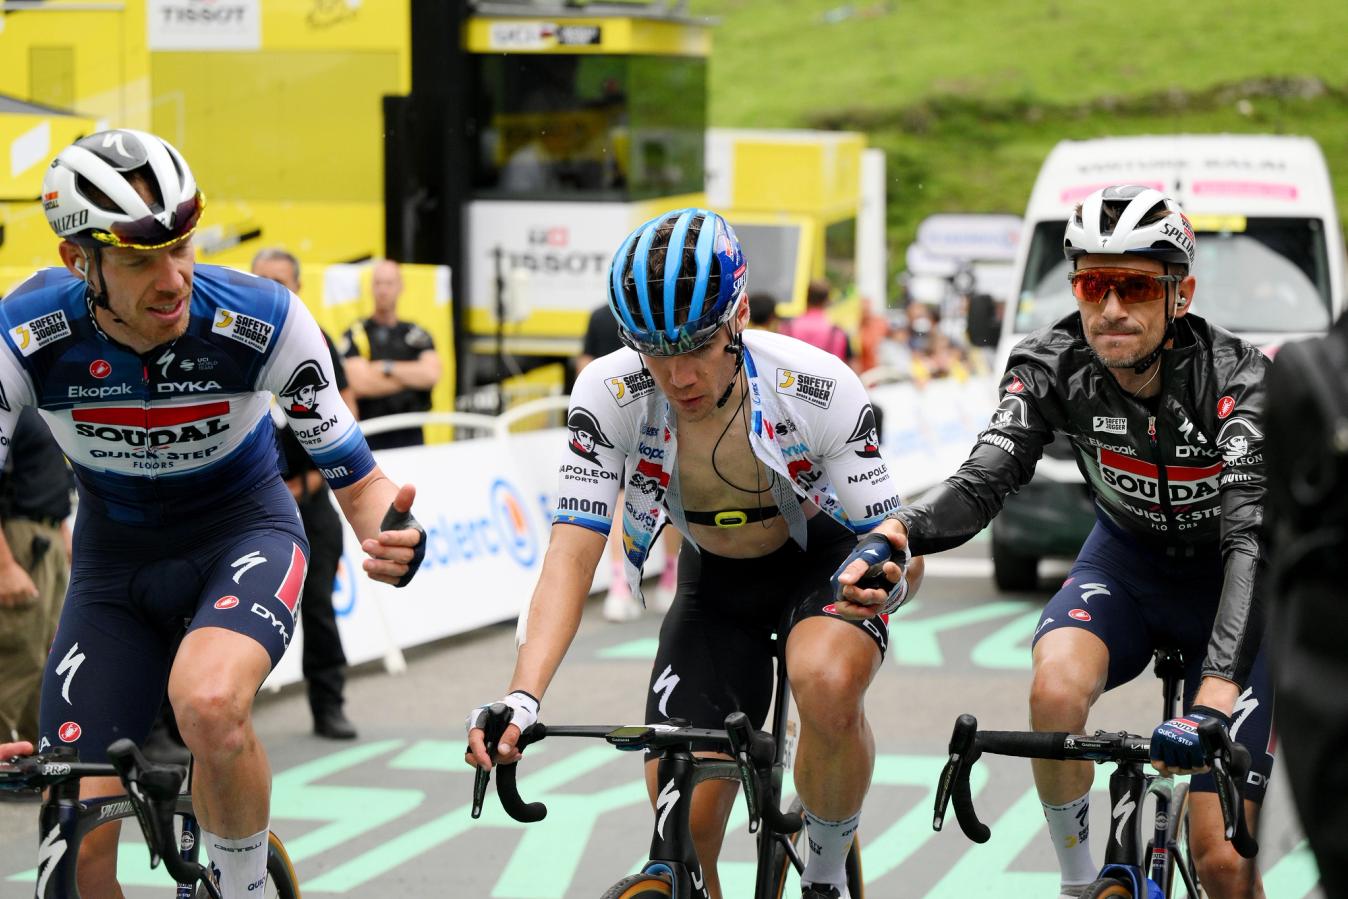 Fabio Jakobsen maintained his brothership with fellow Soudal Quick-Step teammates until the last, but last summer's Tour de France brought no luck for the Dutchman